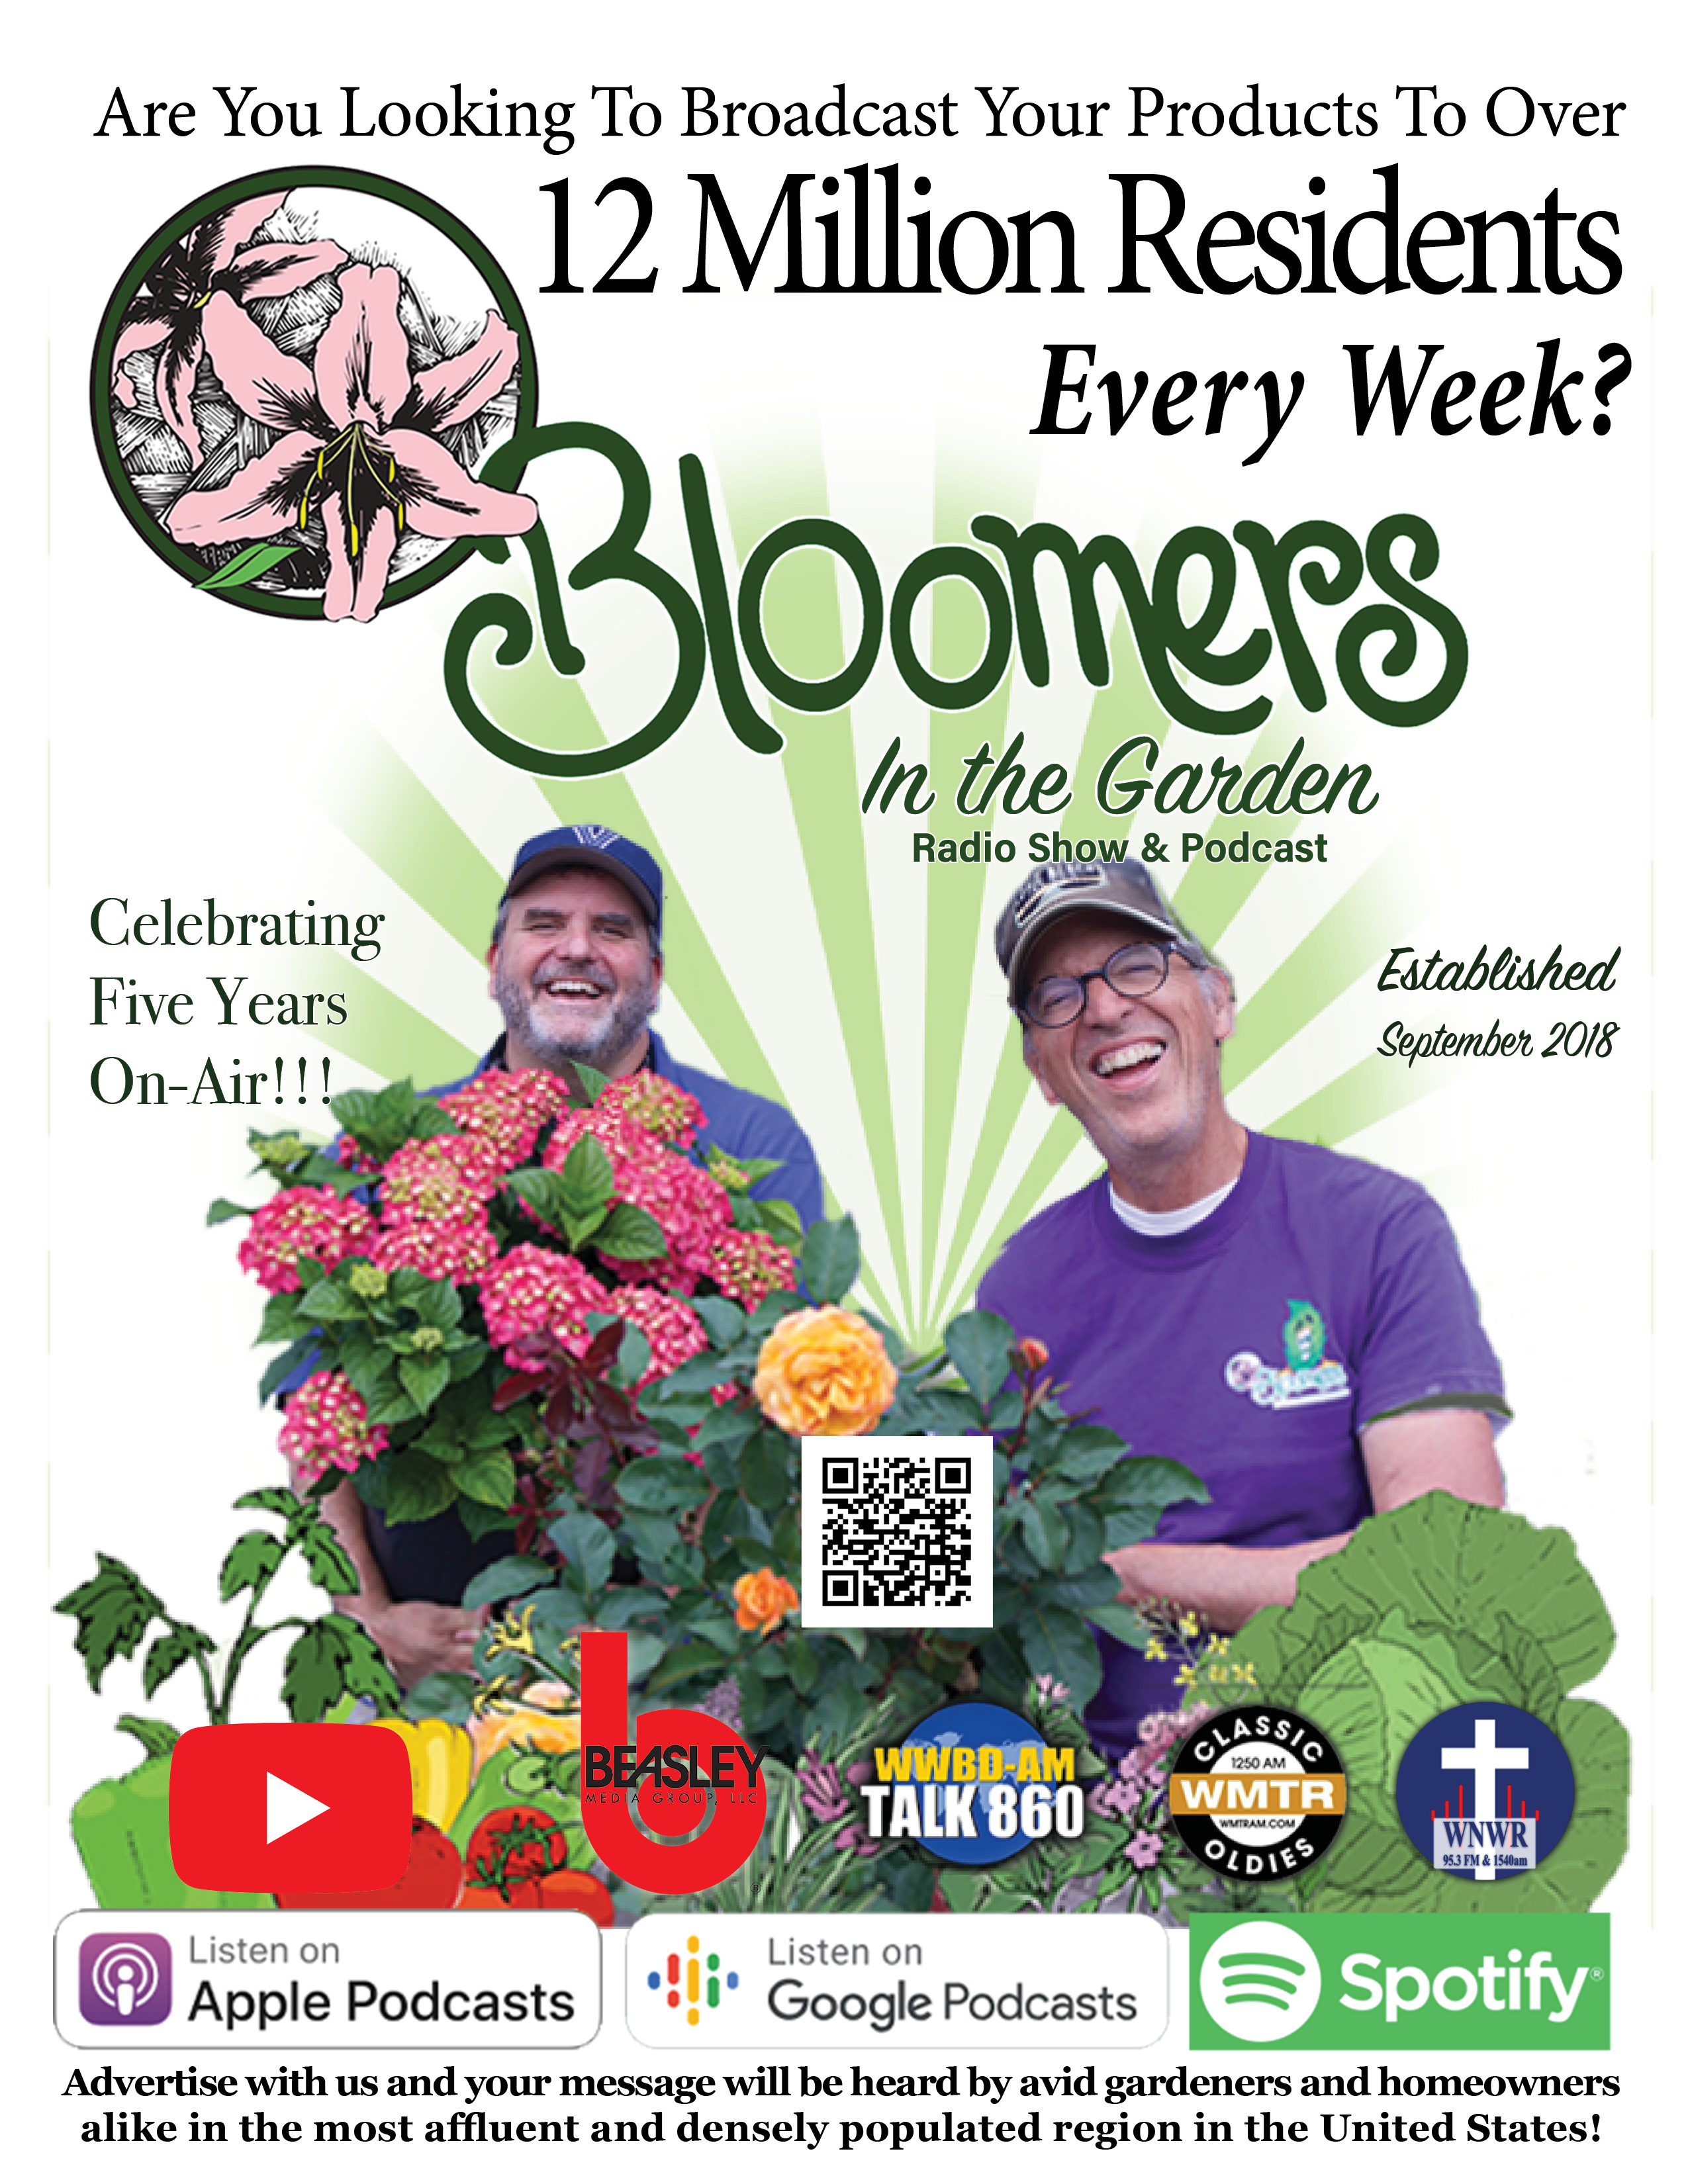 J oin the Fastest Growing Gardening Radio Community As A Partner